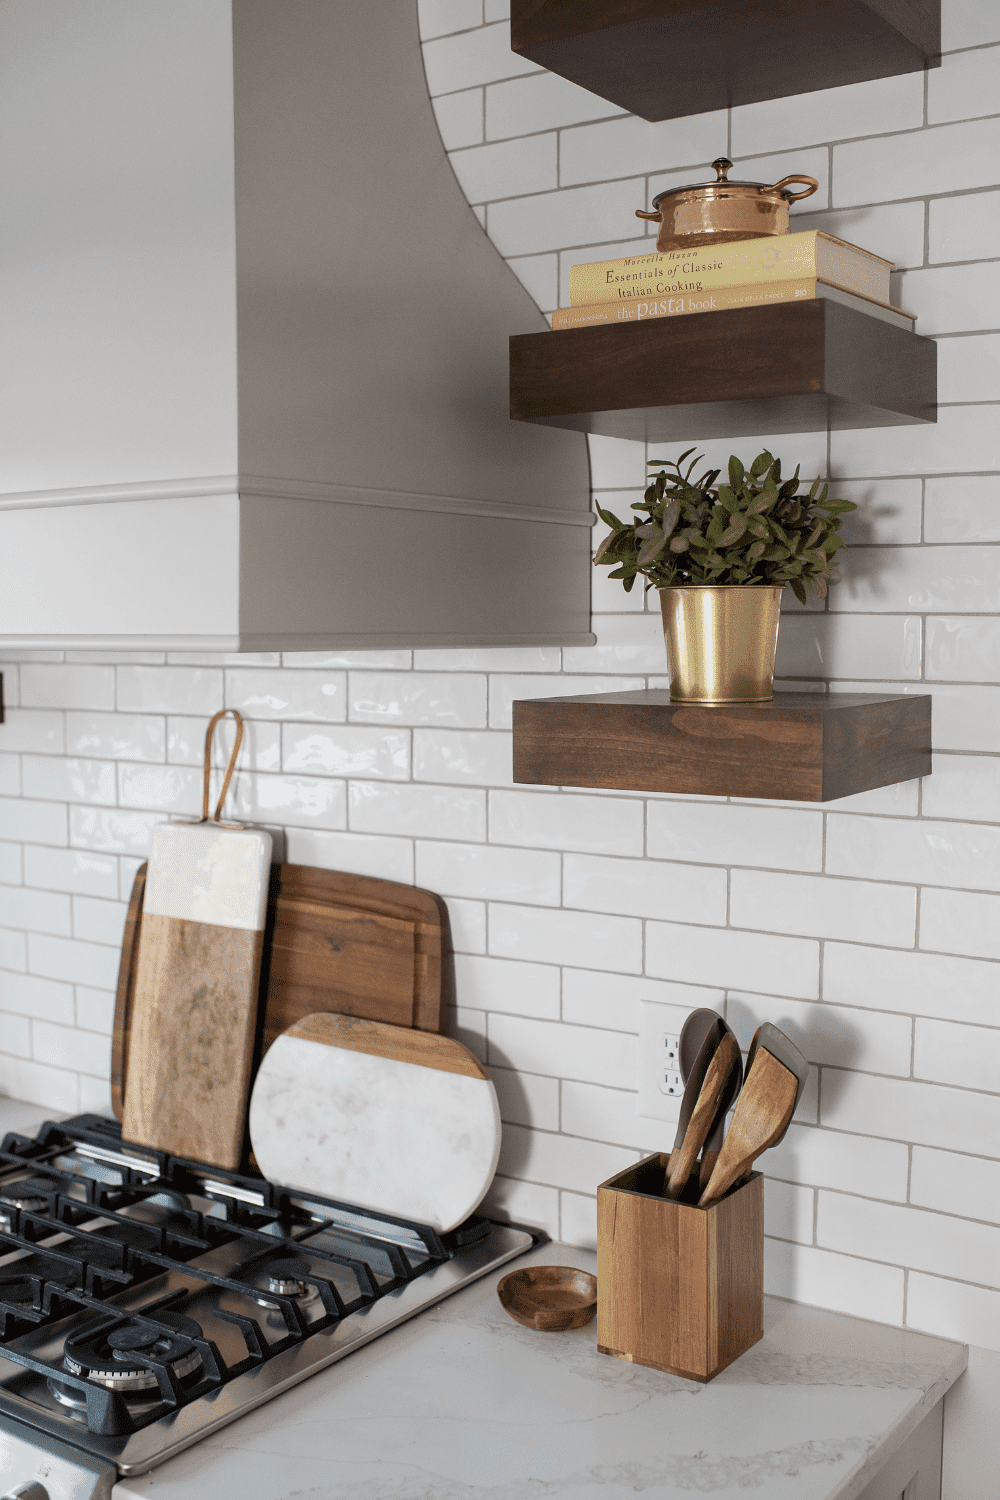 Nicholas Design Build | A neutral kitchen with wooden shelves and pots and pans.